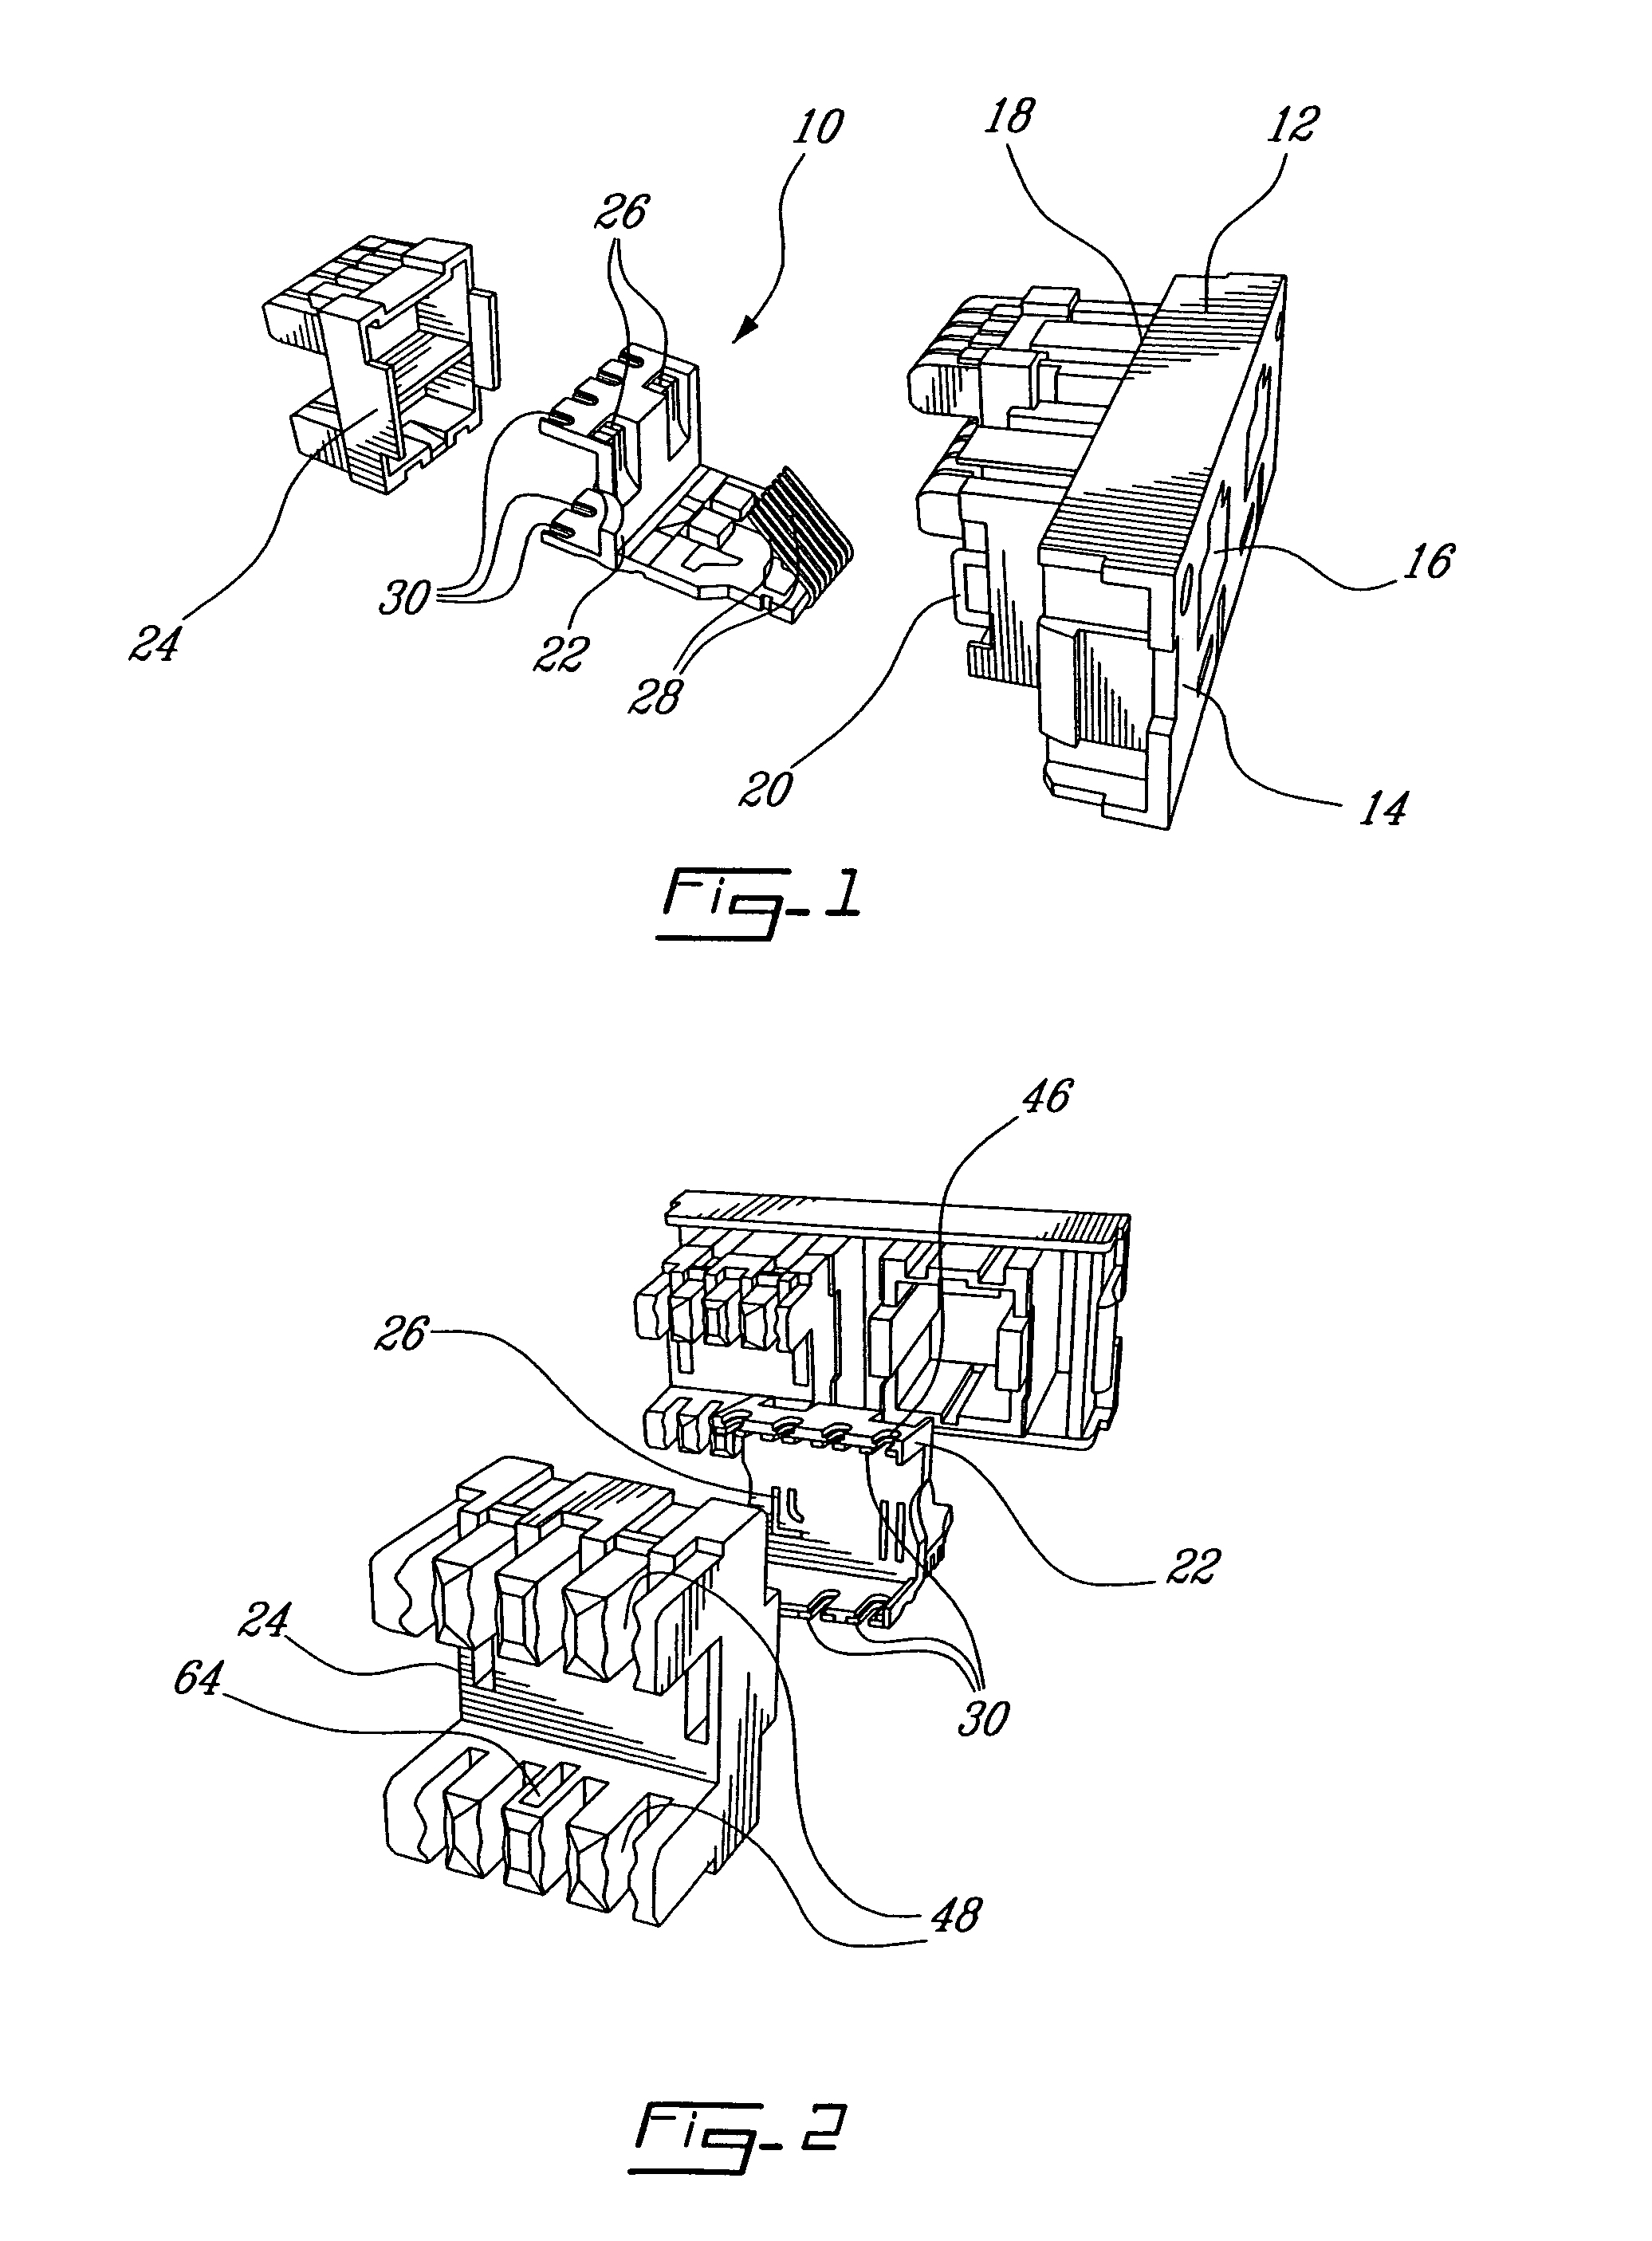 Wire lead guide and method for terminating a communications cable